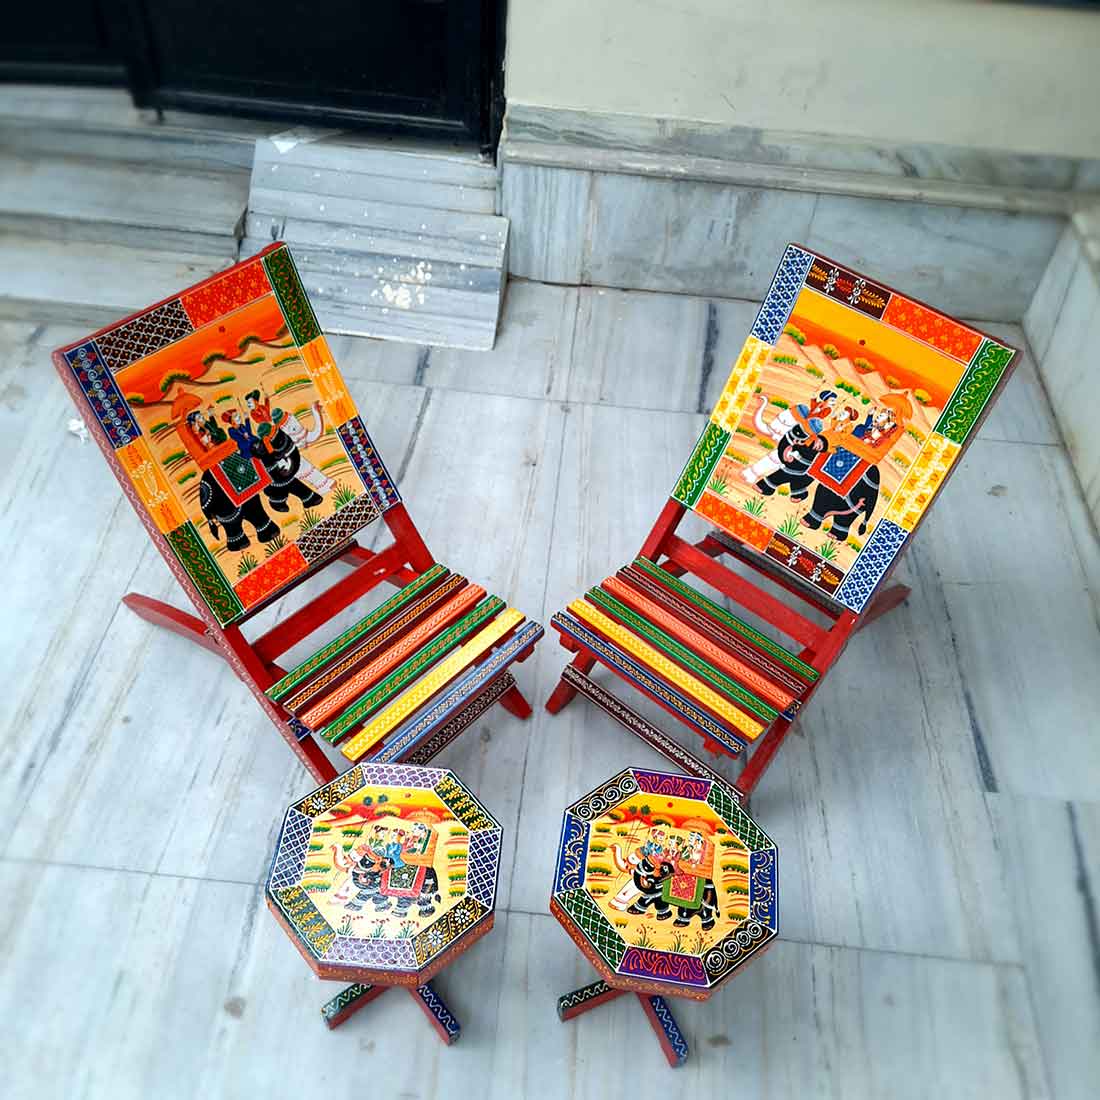 Set of 2 Chairs & 2 Tables -For Living Room & Outdoor Decor- Set of 4 - ApkaMart